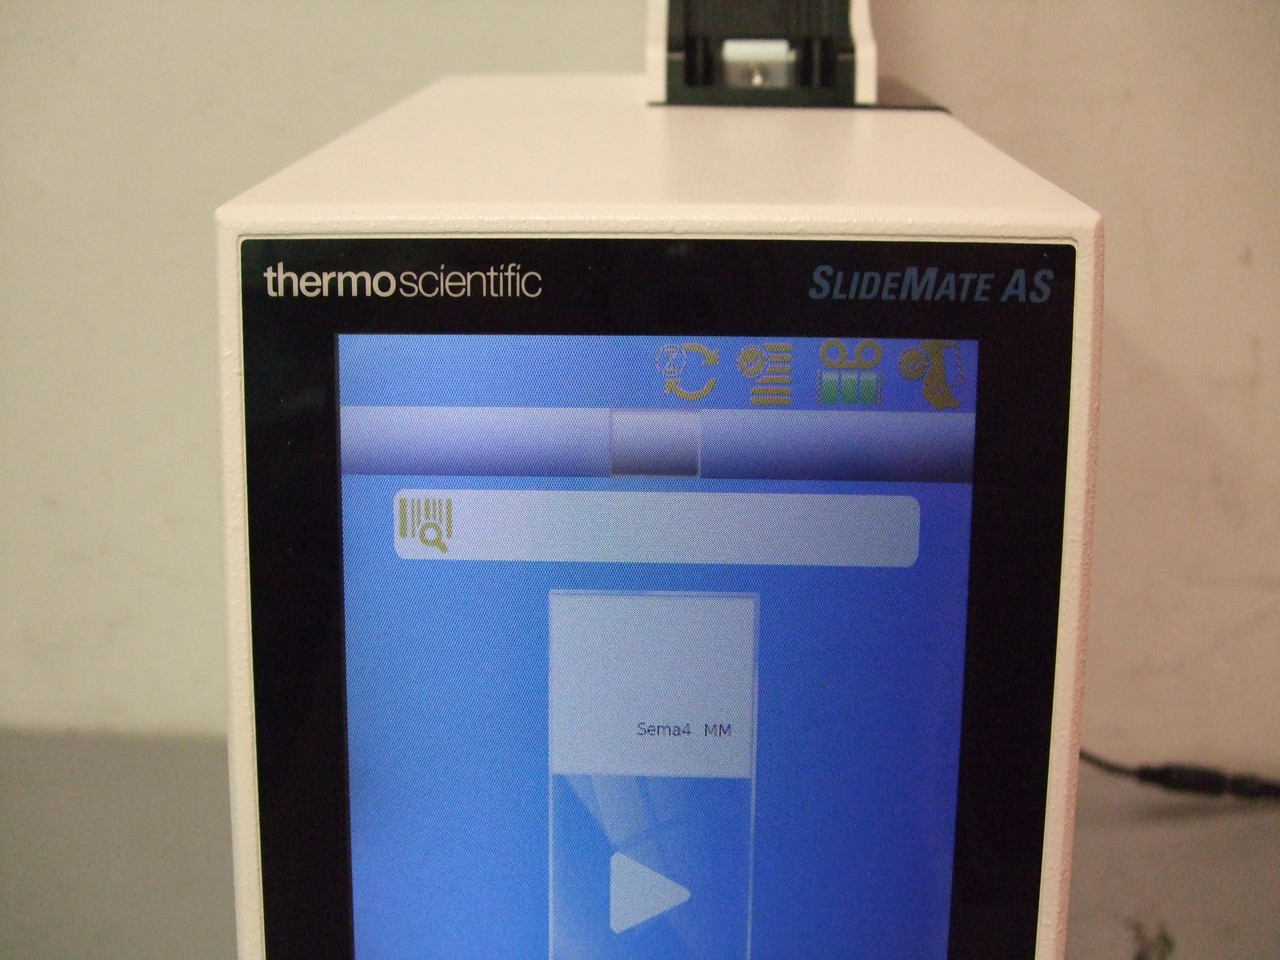 Thermo Scientific SlideMate AS w/ Slide Delivery System